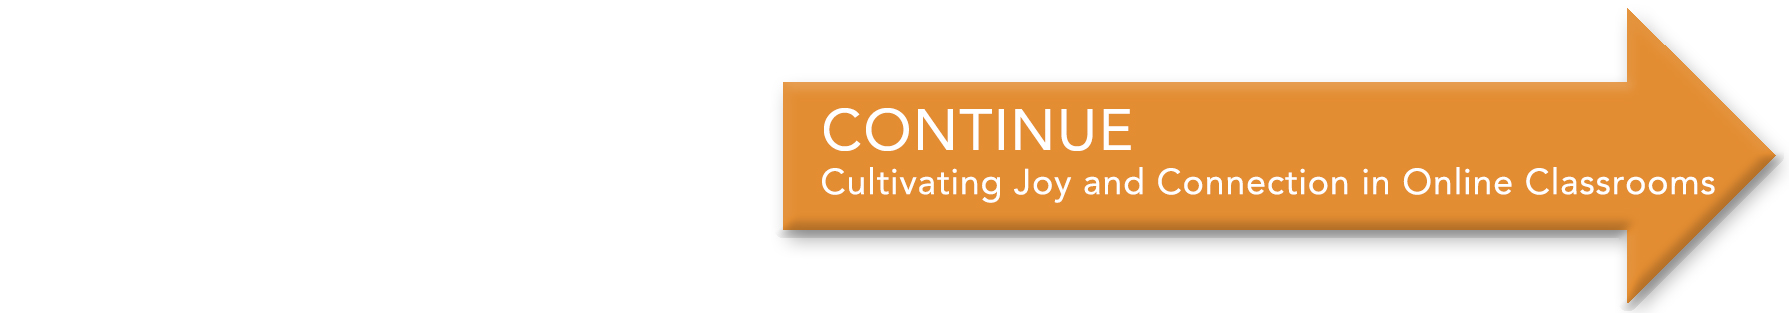 Orange arrow icon that links to the section on cultivating joy